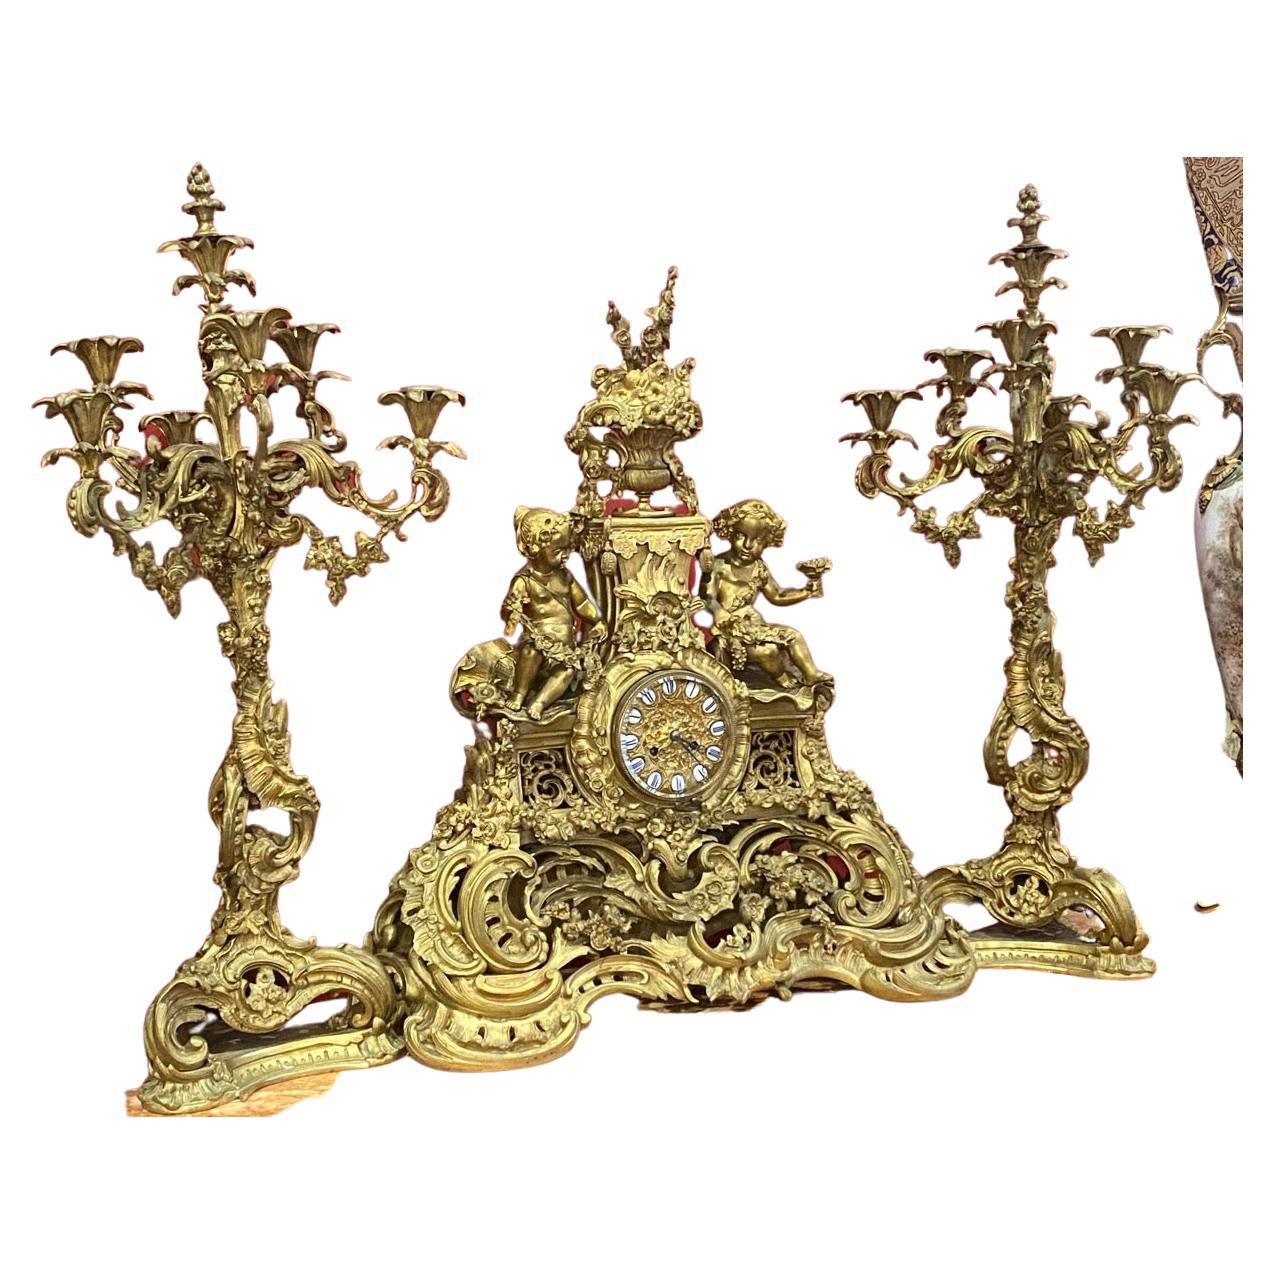 Majestic 19th Century French Gilt Bronze Candelabras and Clock Garniture